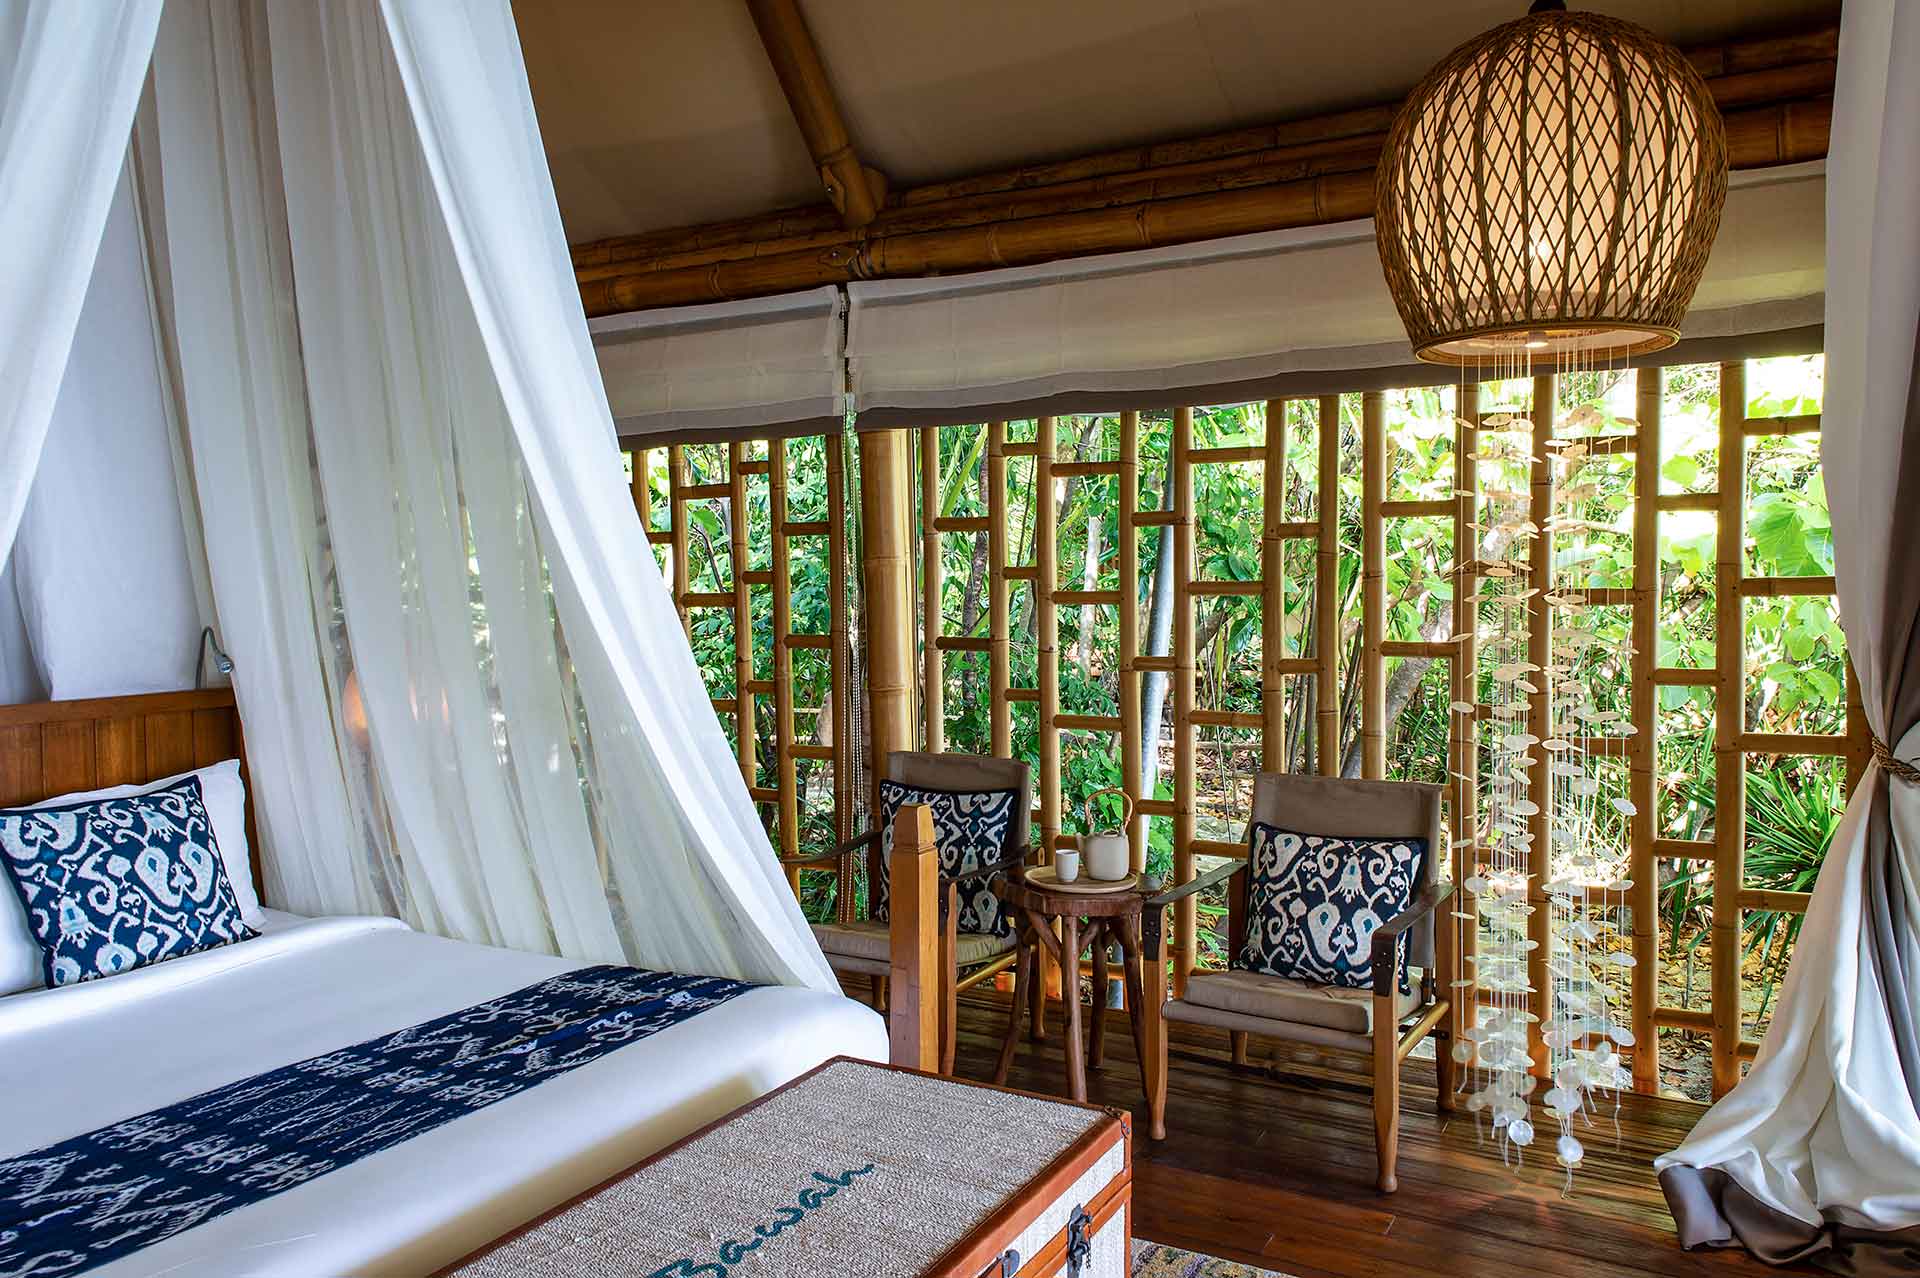 suite bedroom with open side showing outside nature and bamboo frame